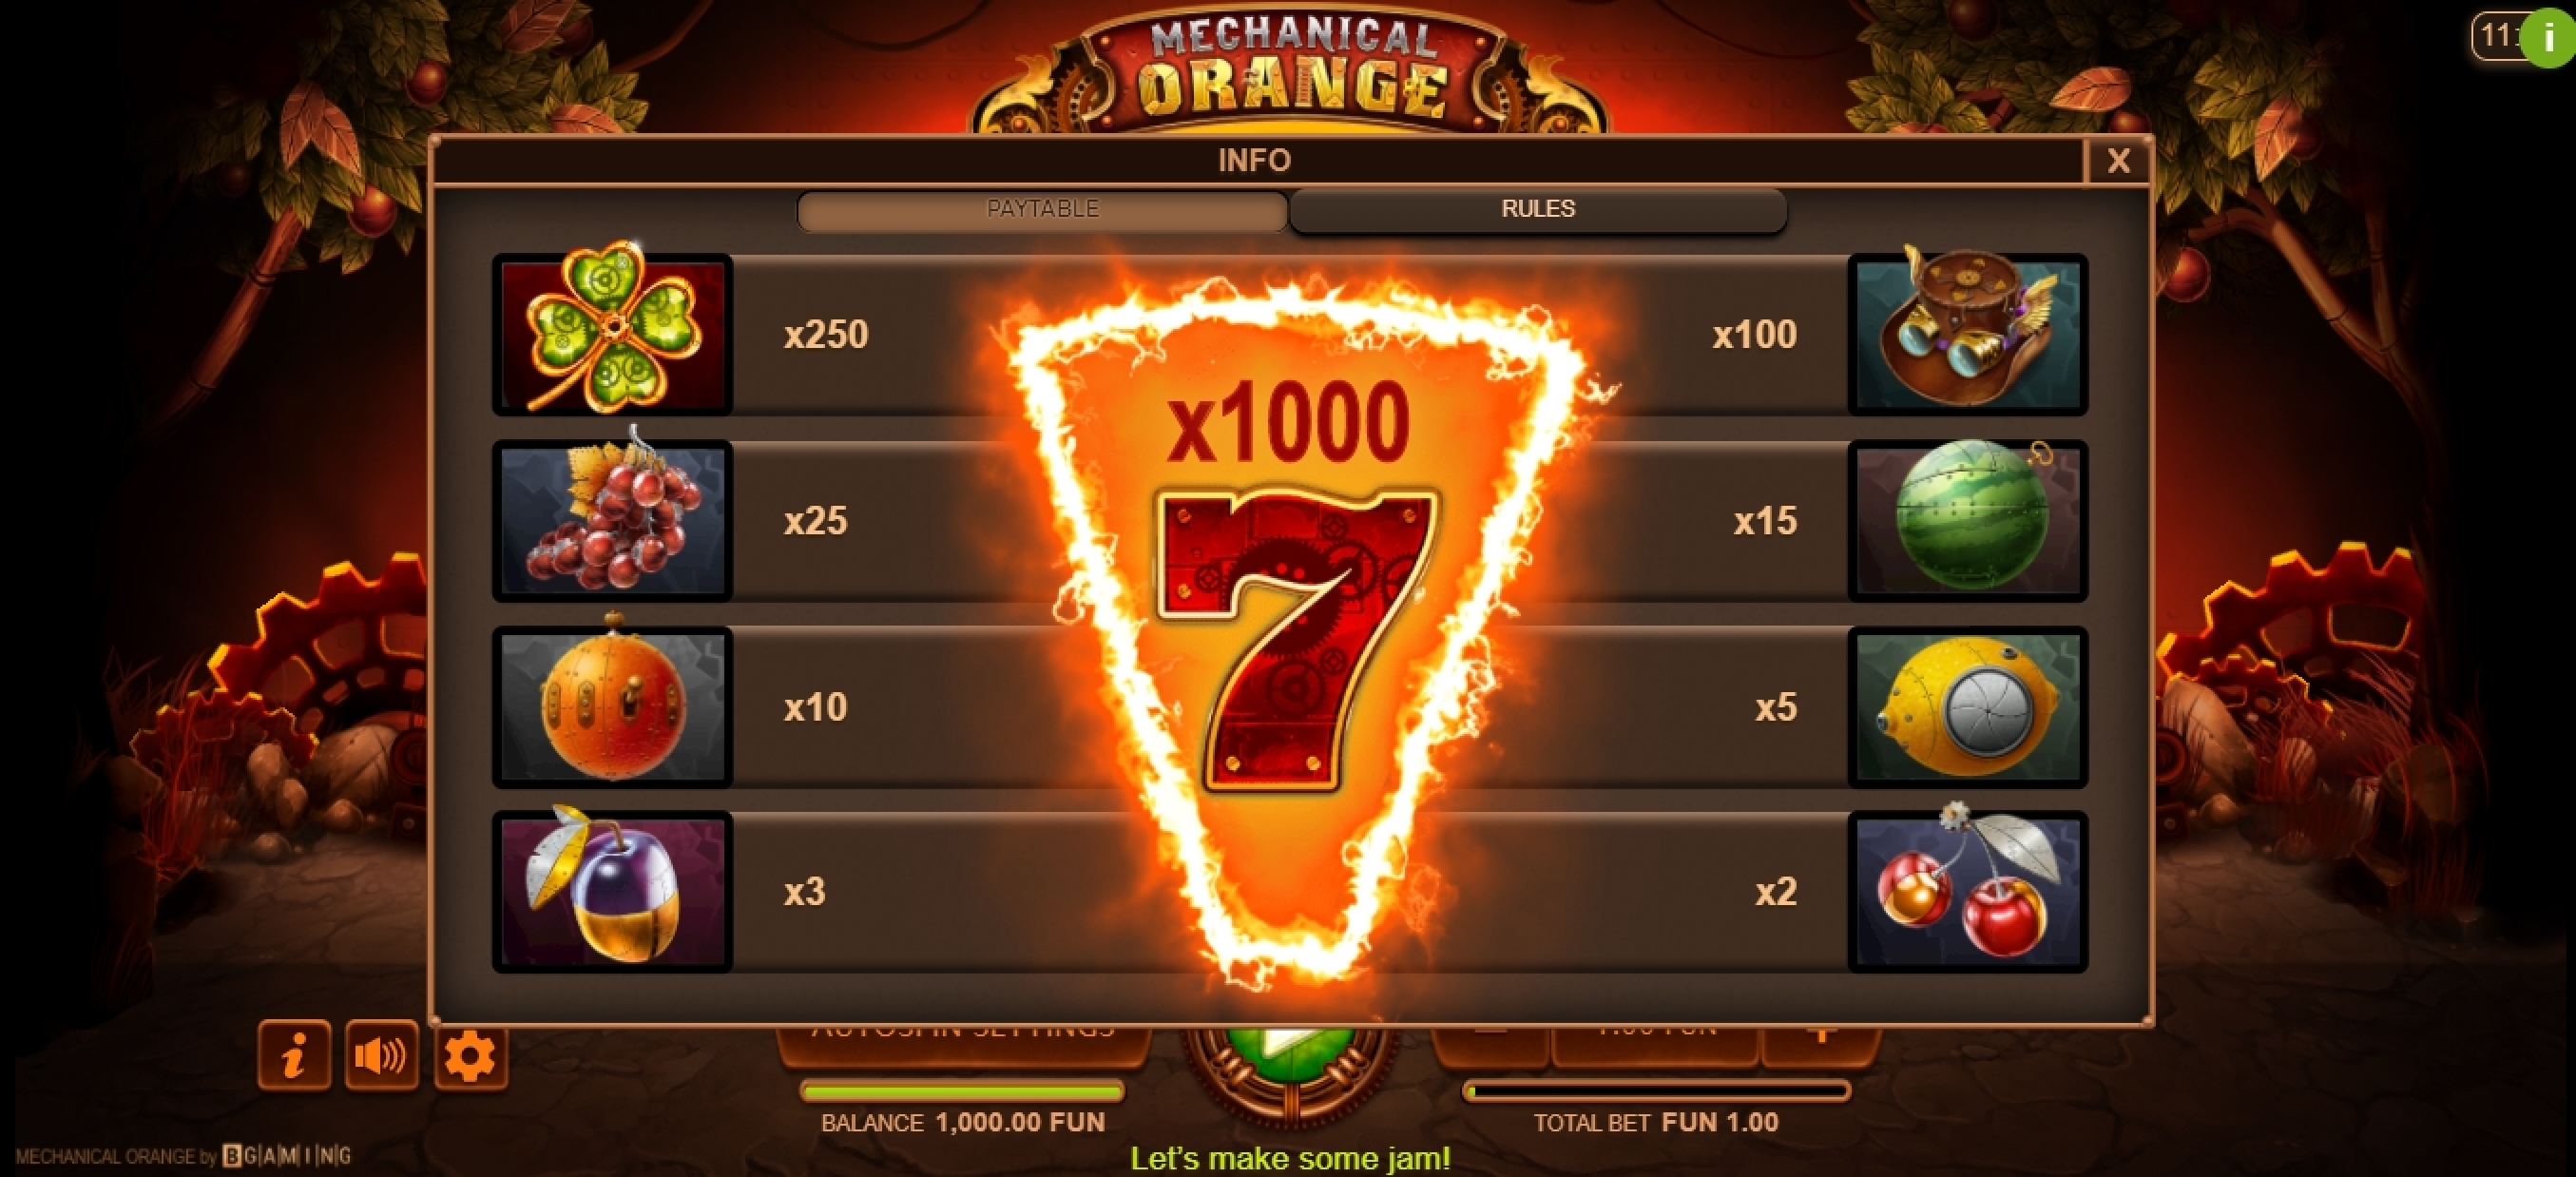 Info of Mechanical Orange Slot Game by BGAMING